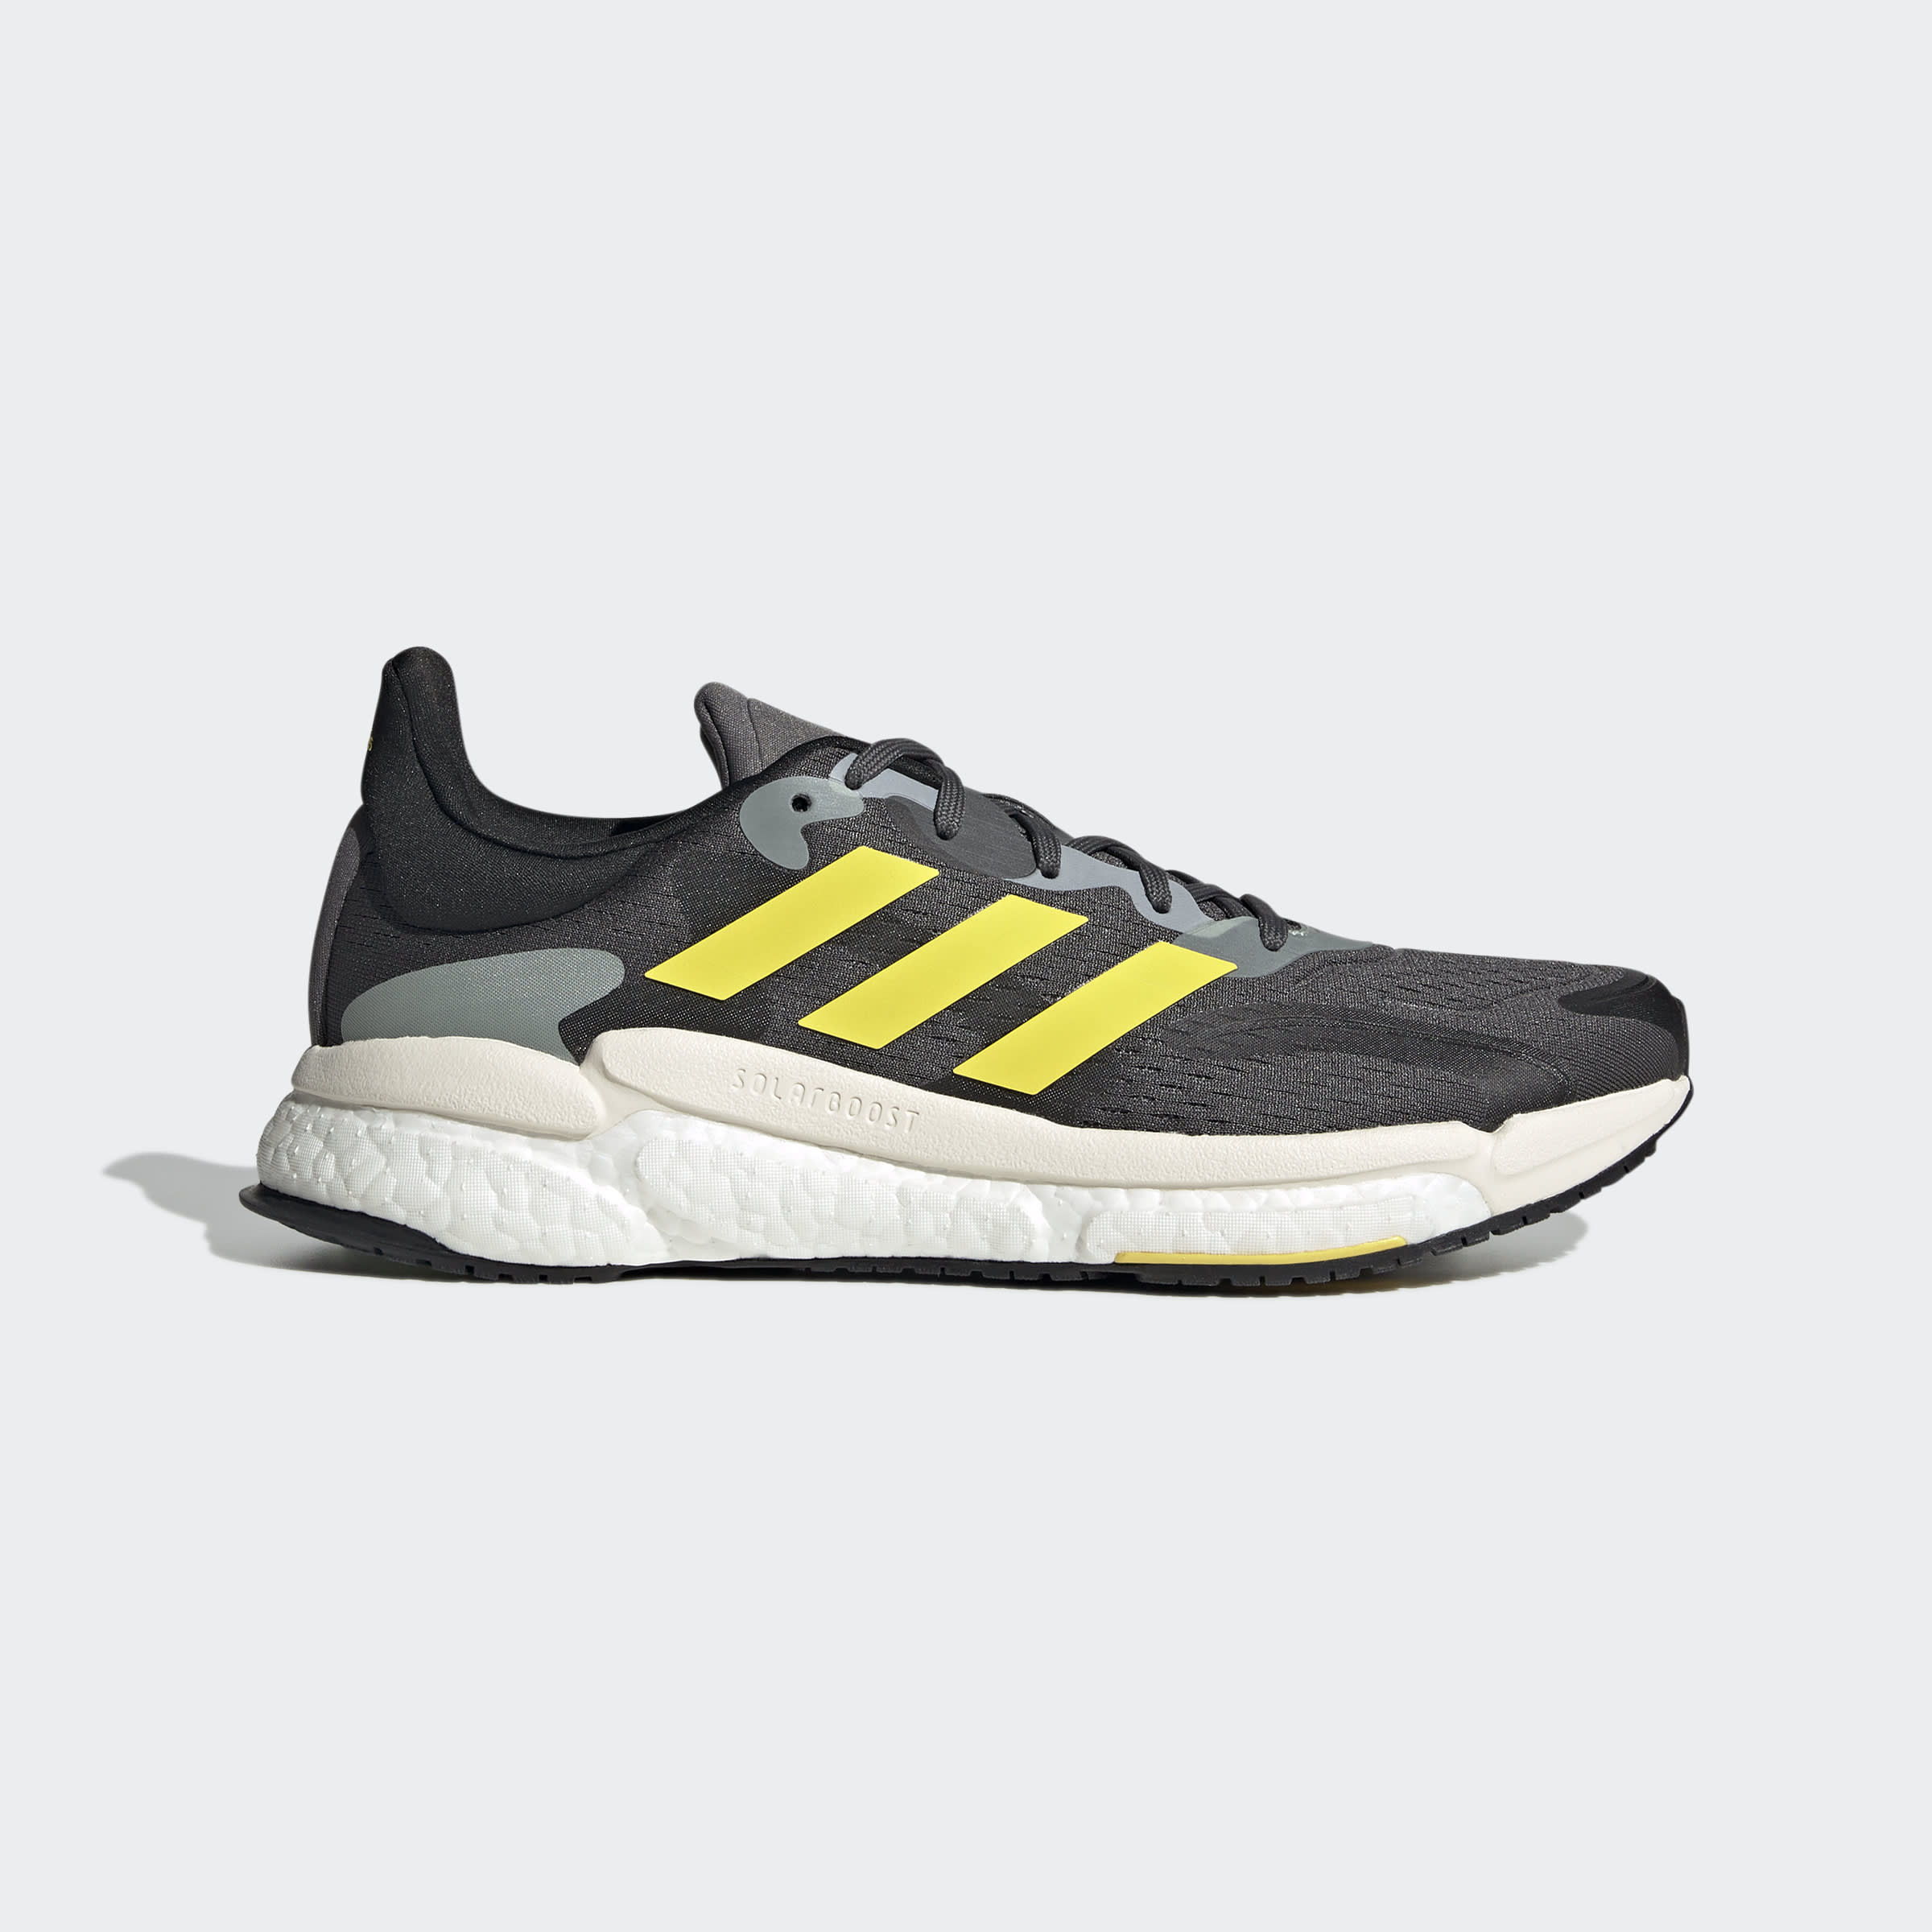 adidas Solarboost 4 Shoes Grey Six / Beam Yellow / Linen Green Mens Shoes